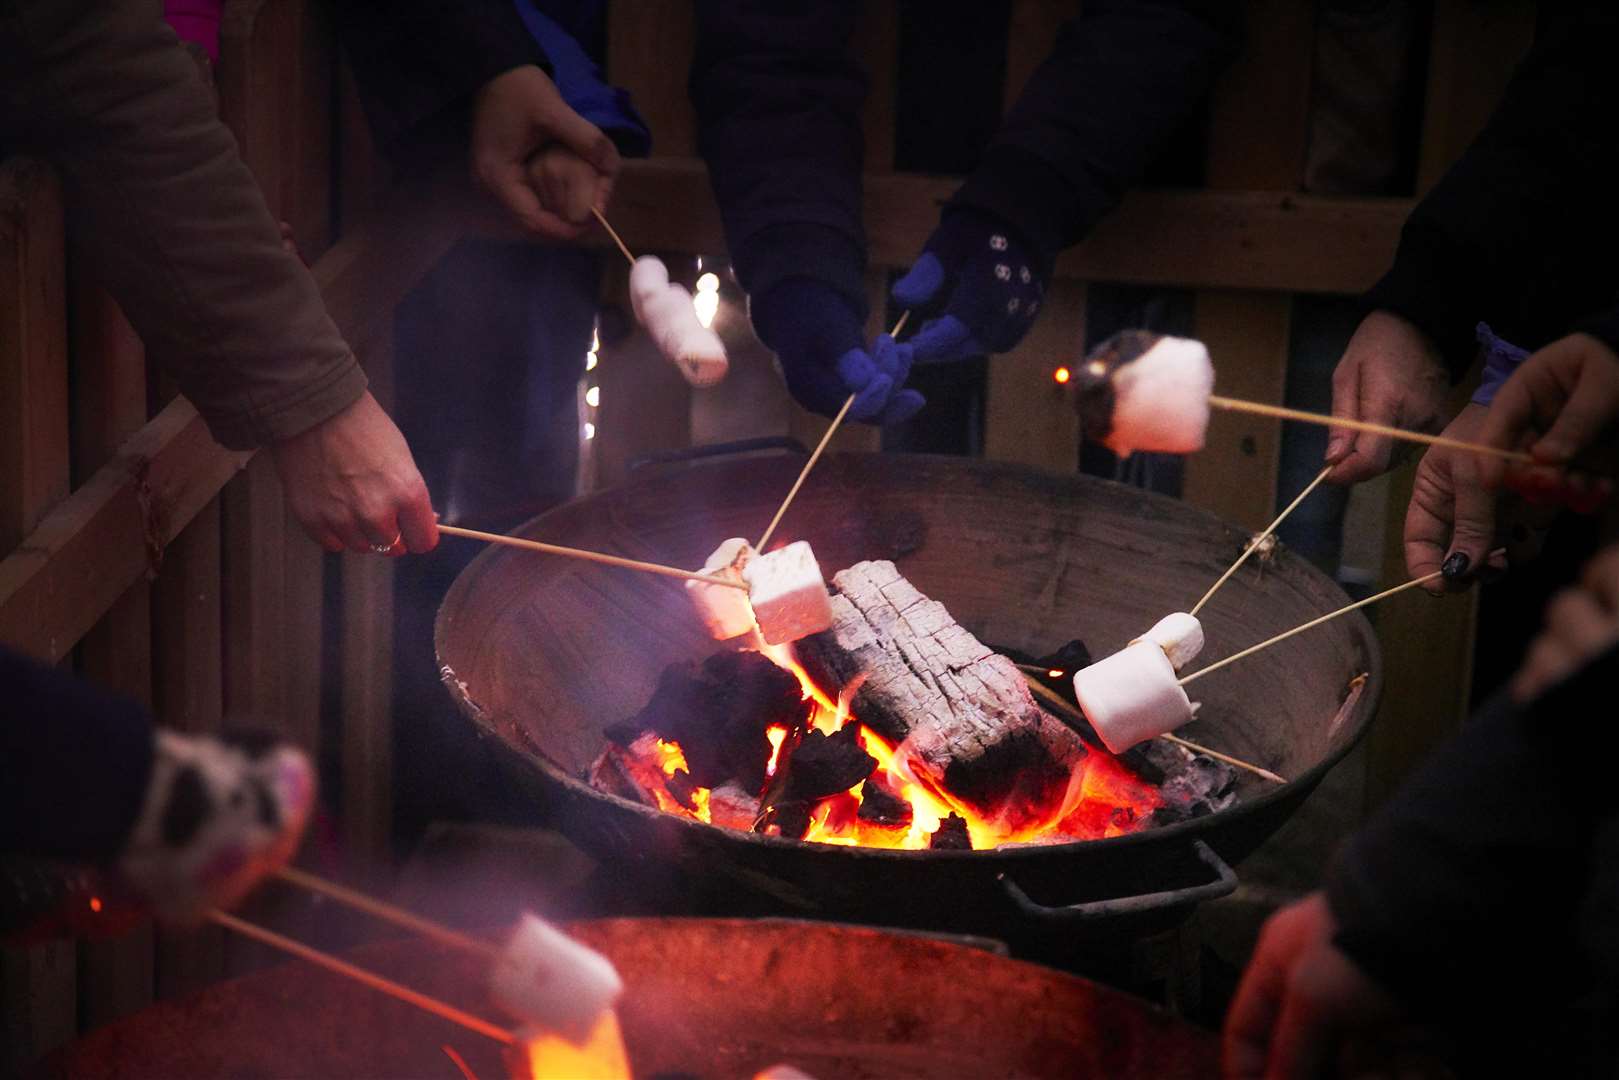 Fire pits will allow visitors to toast marshmallows